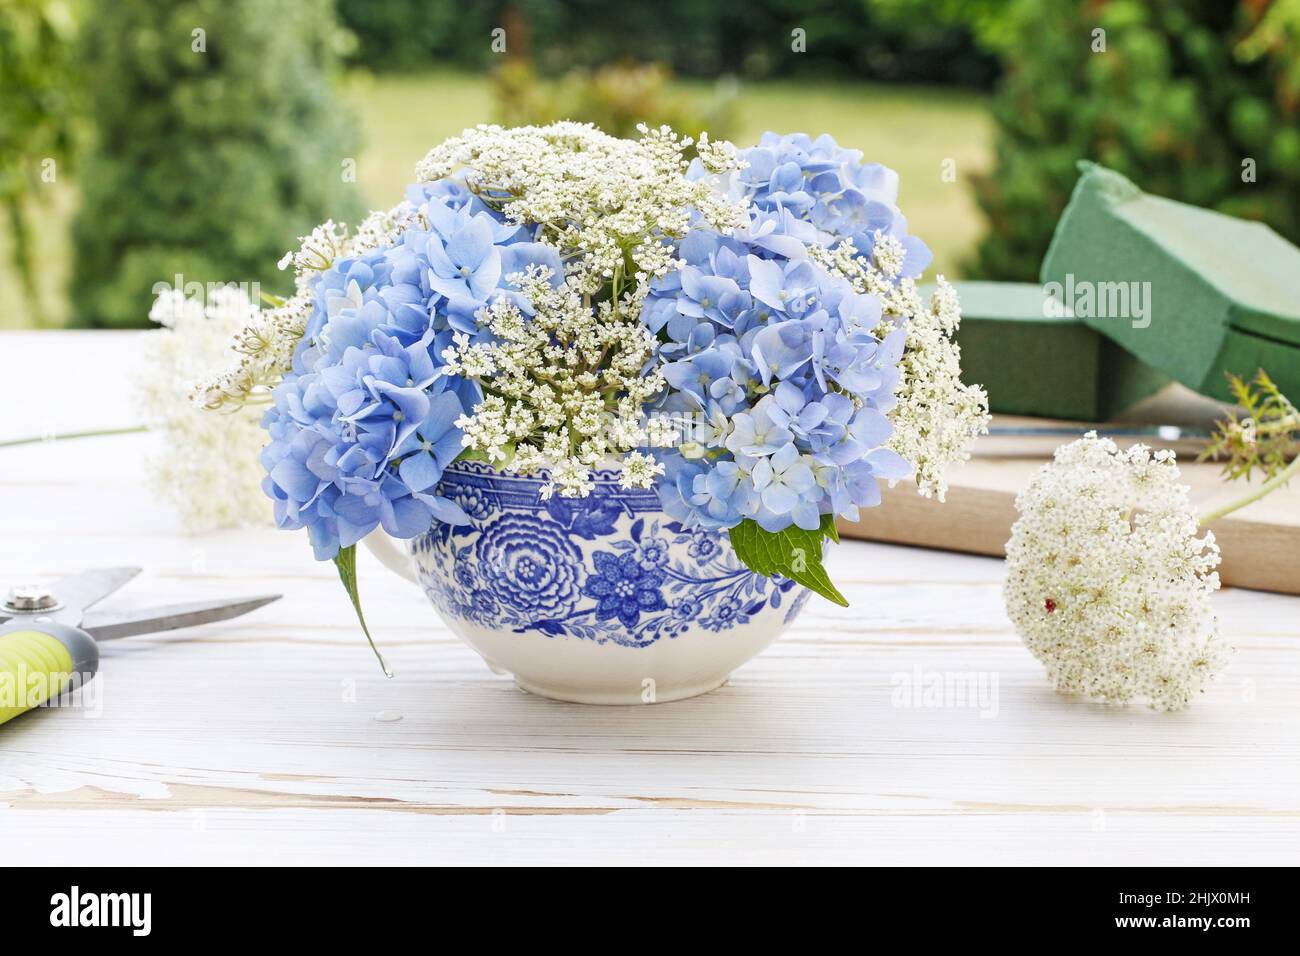 Florist at wotk: How to make floral arrangement with blue hortensia (hydrangea) and white Queen Anne's lace (daucus carota) flowers on white wooden table. Step by step, tutorial. Stock Photo